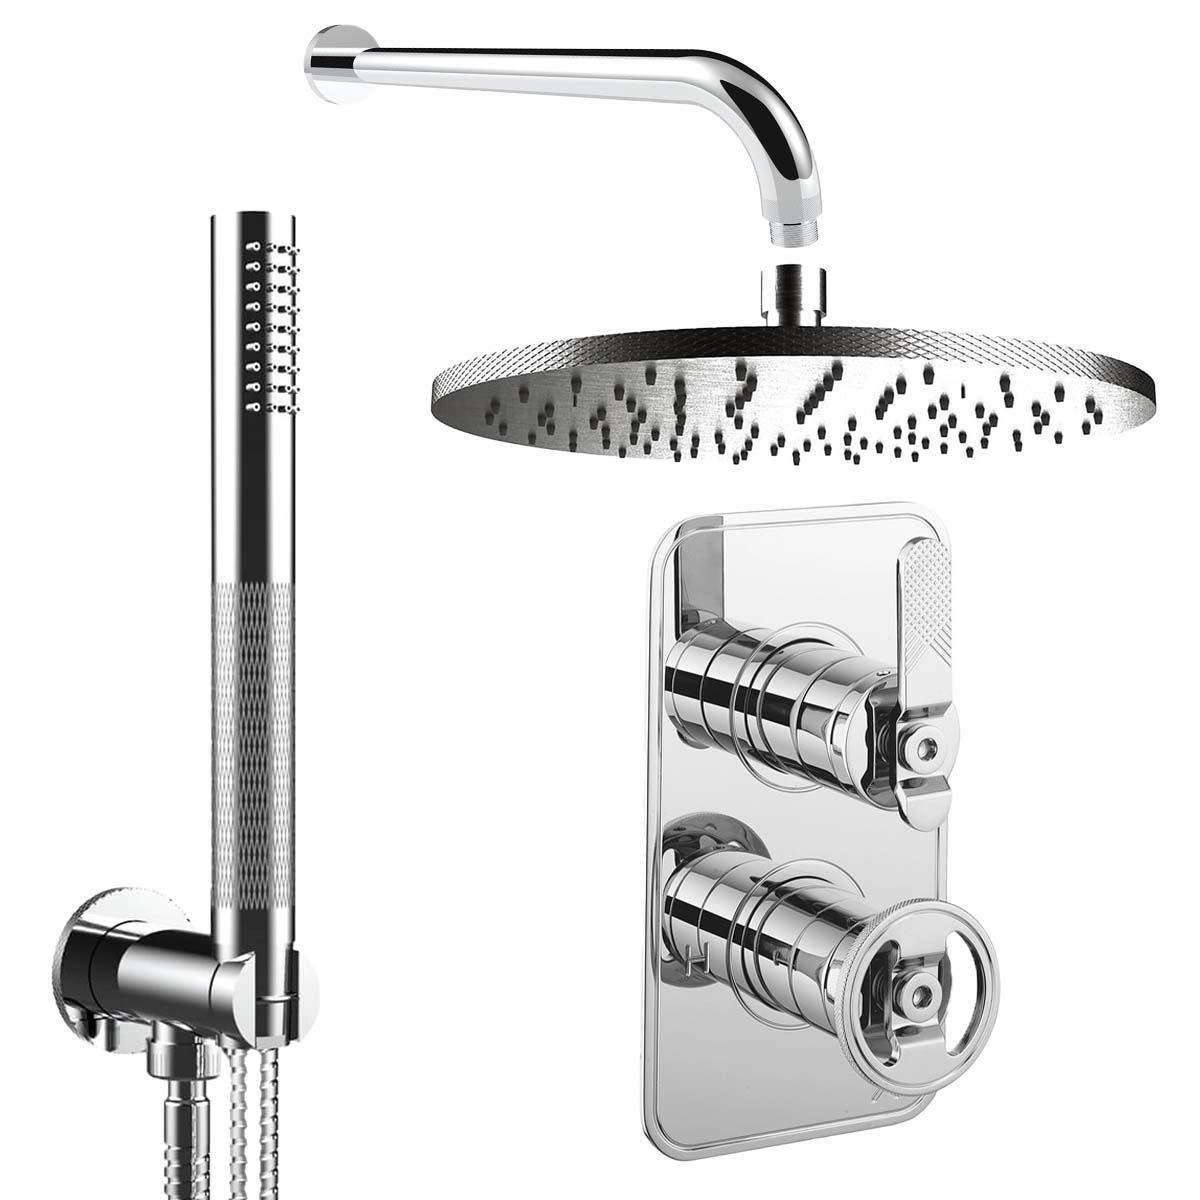 Crosswater Union 2 Outlet Thermostatic Shower Valve With Handset and Wall Mounted Overhead Chrome